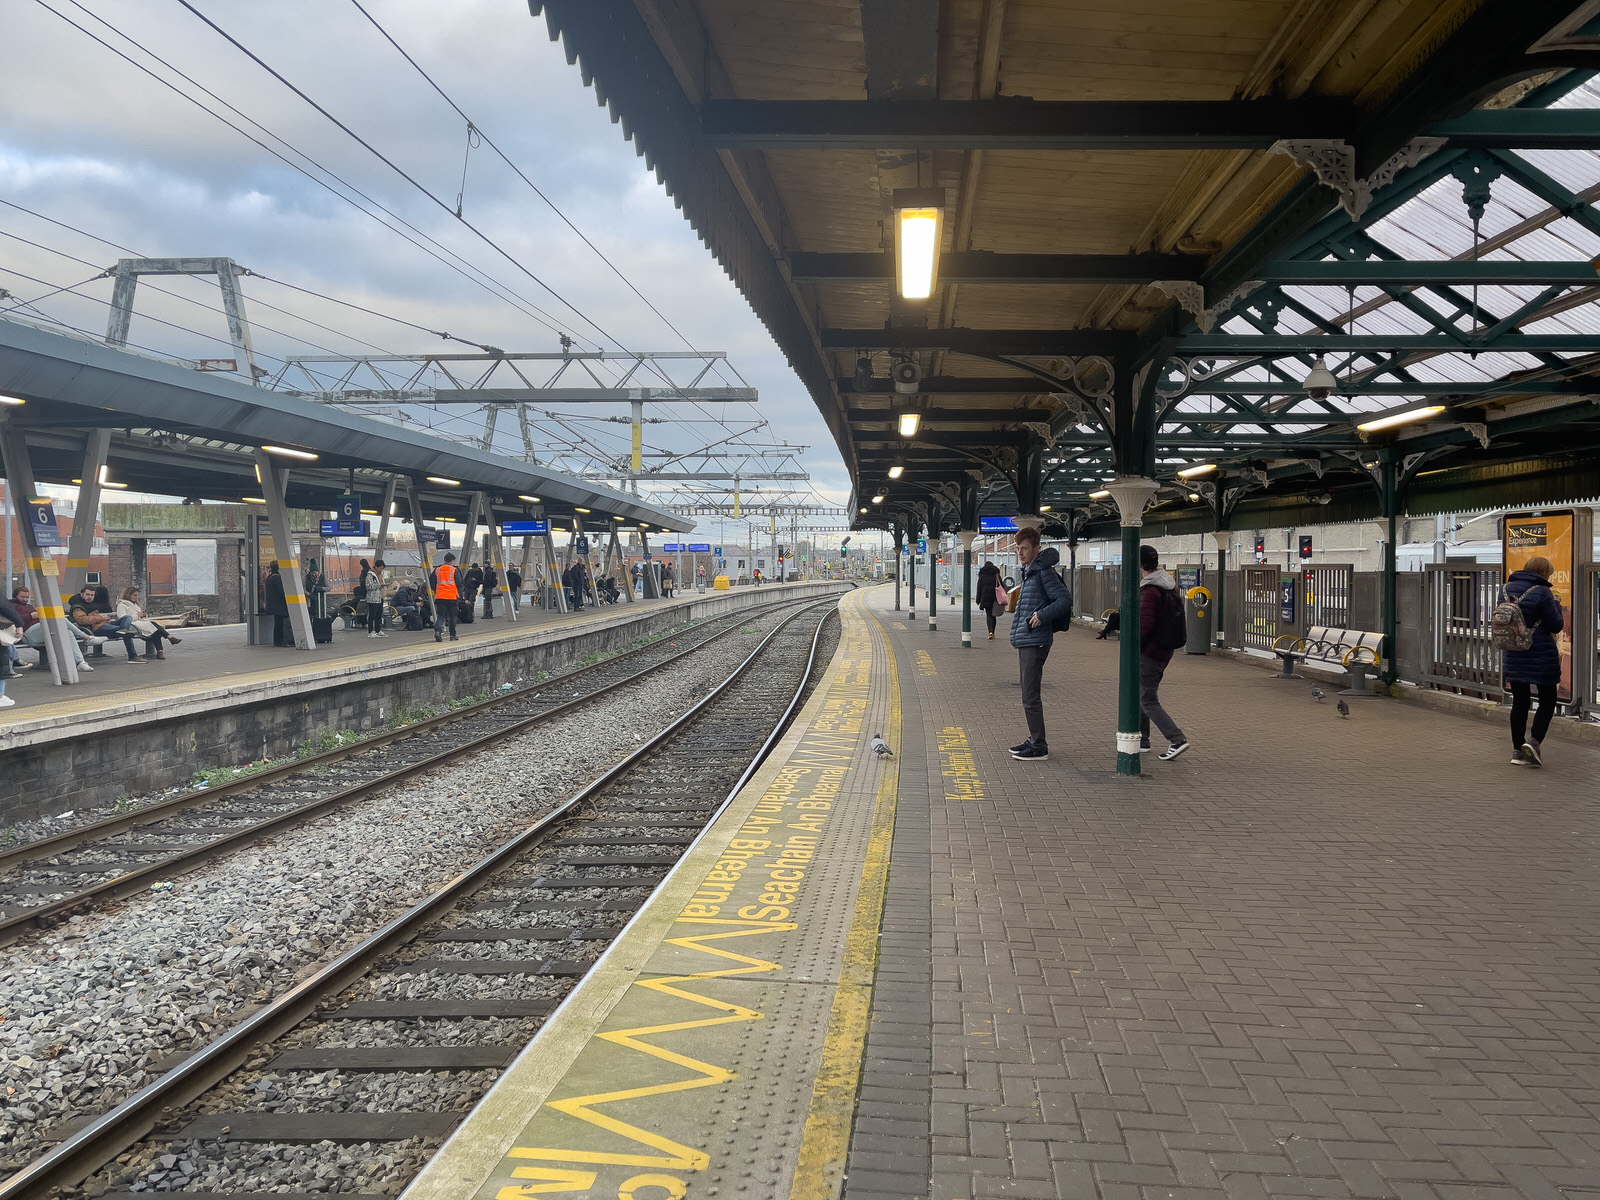 I WENT TO CONNOLLY STATION AND TRAVELLED BY DART 005